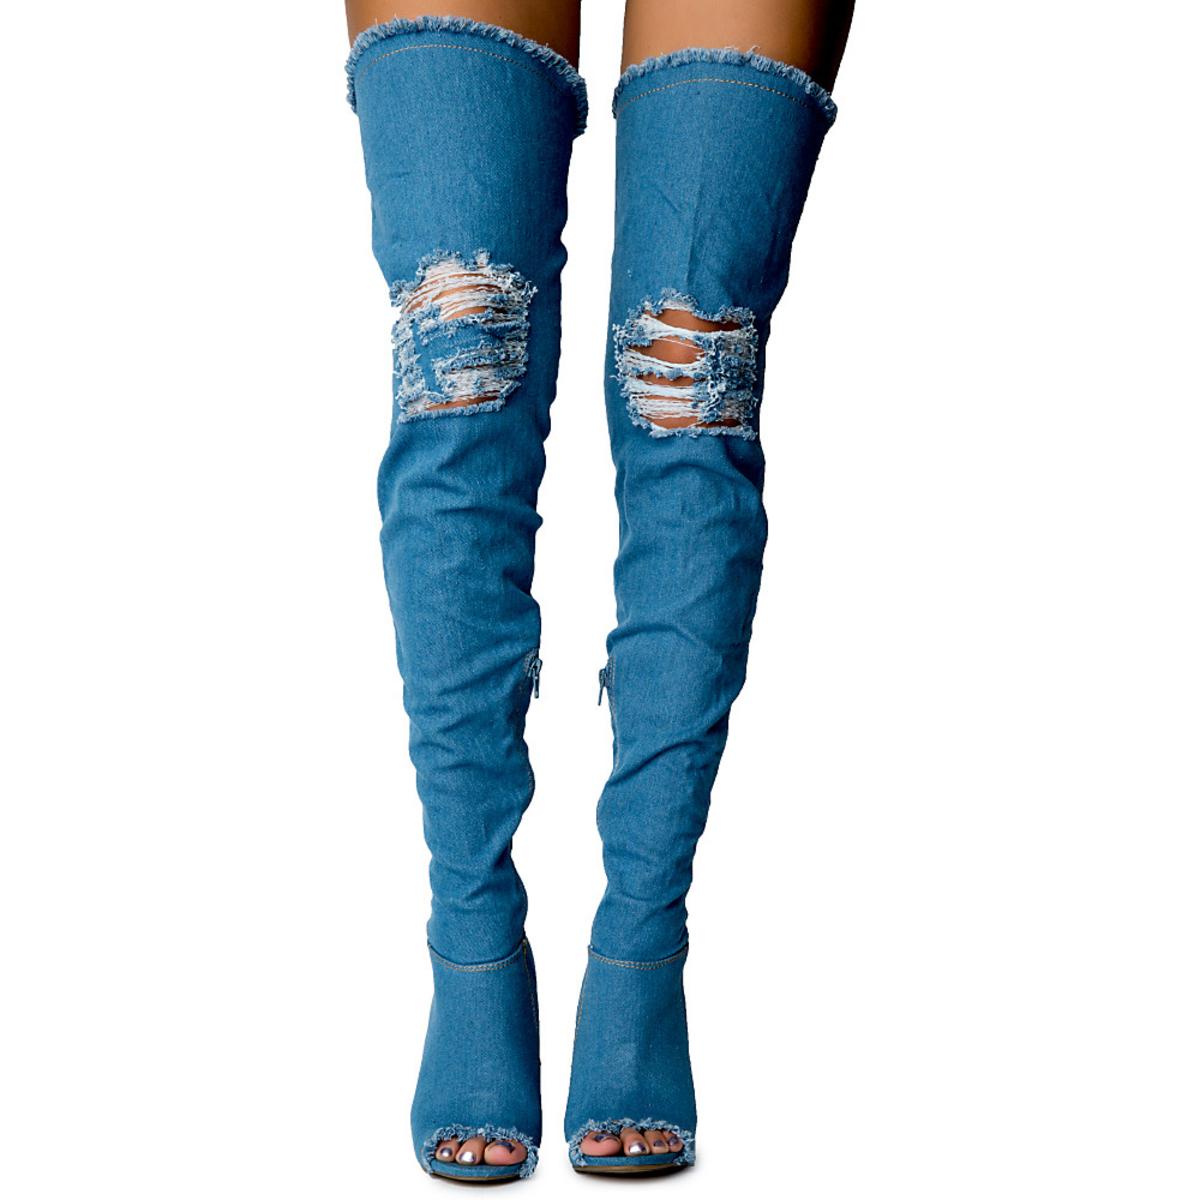 Limelight-60S Over The Knee Boot Blue